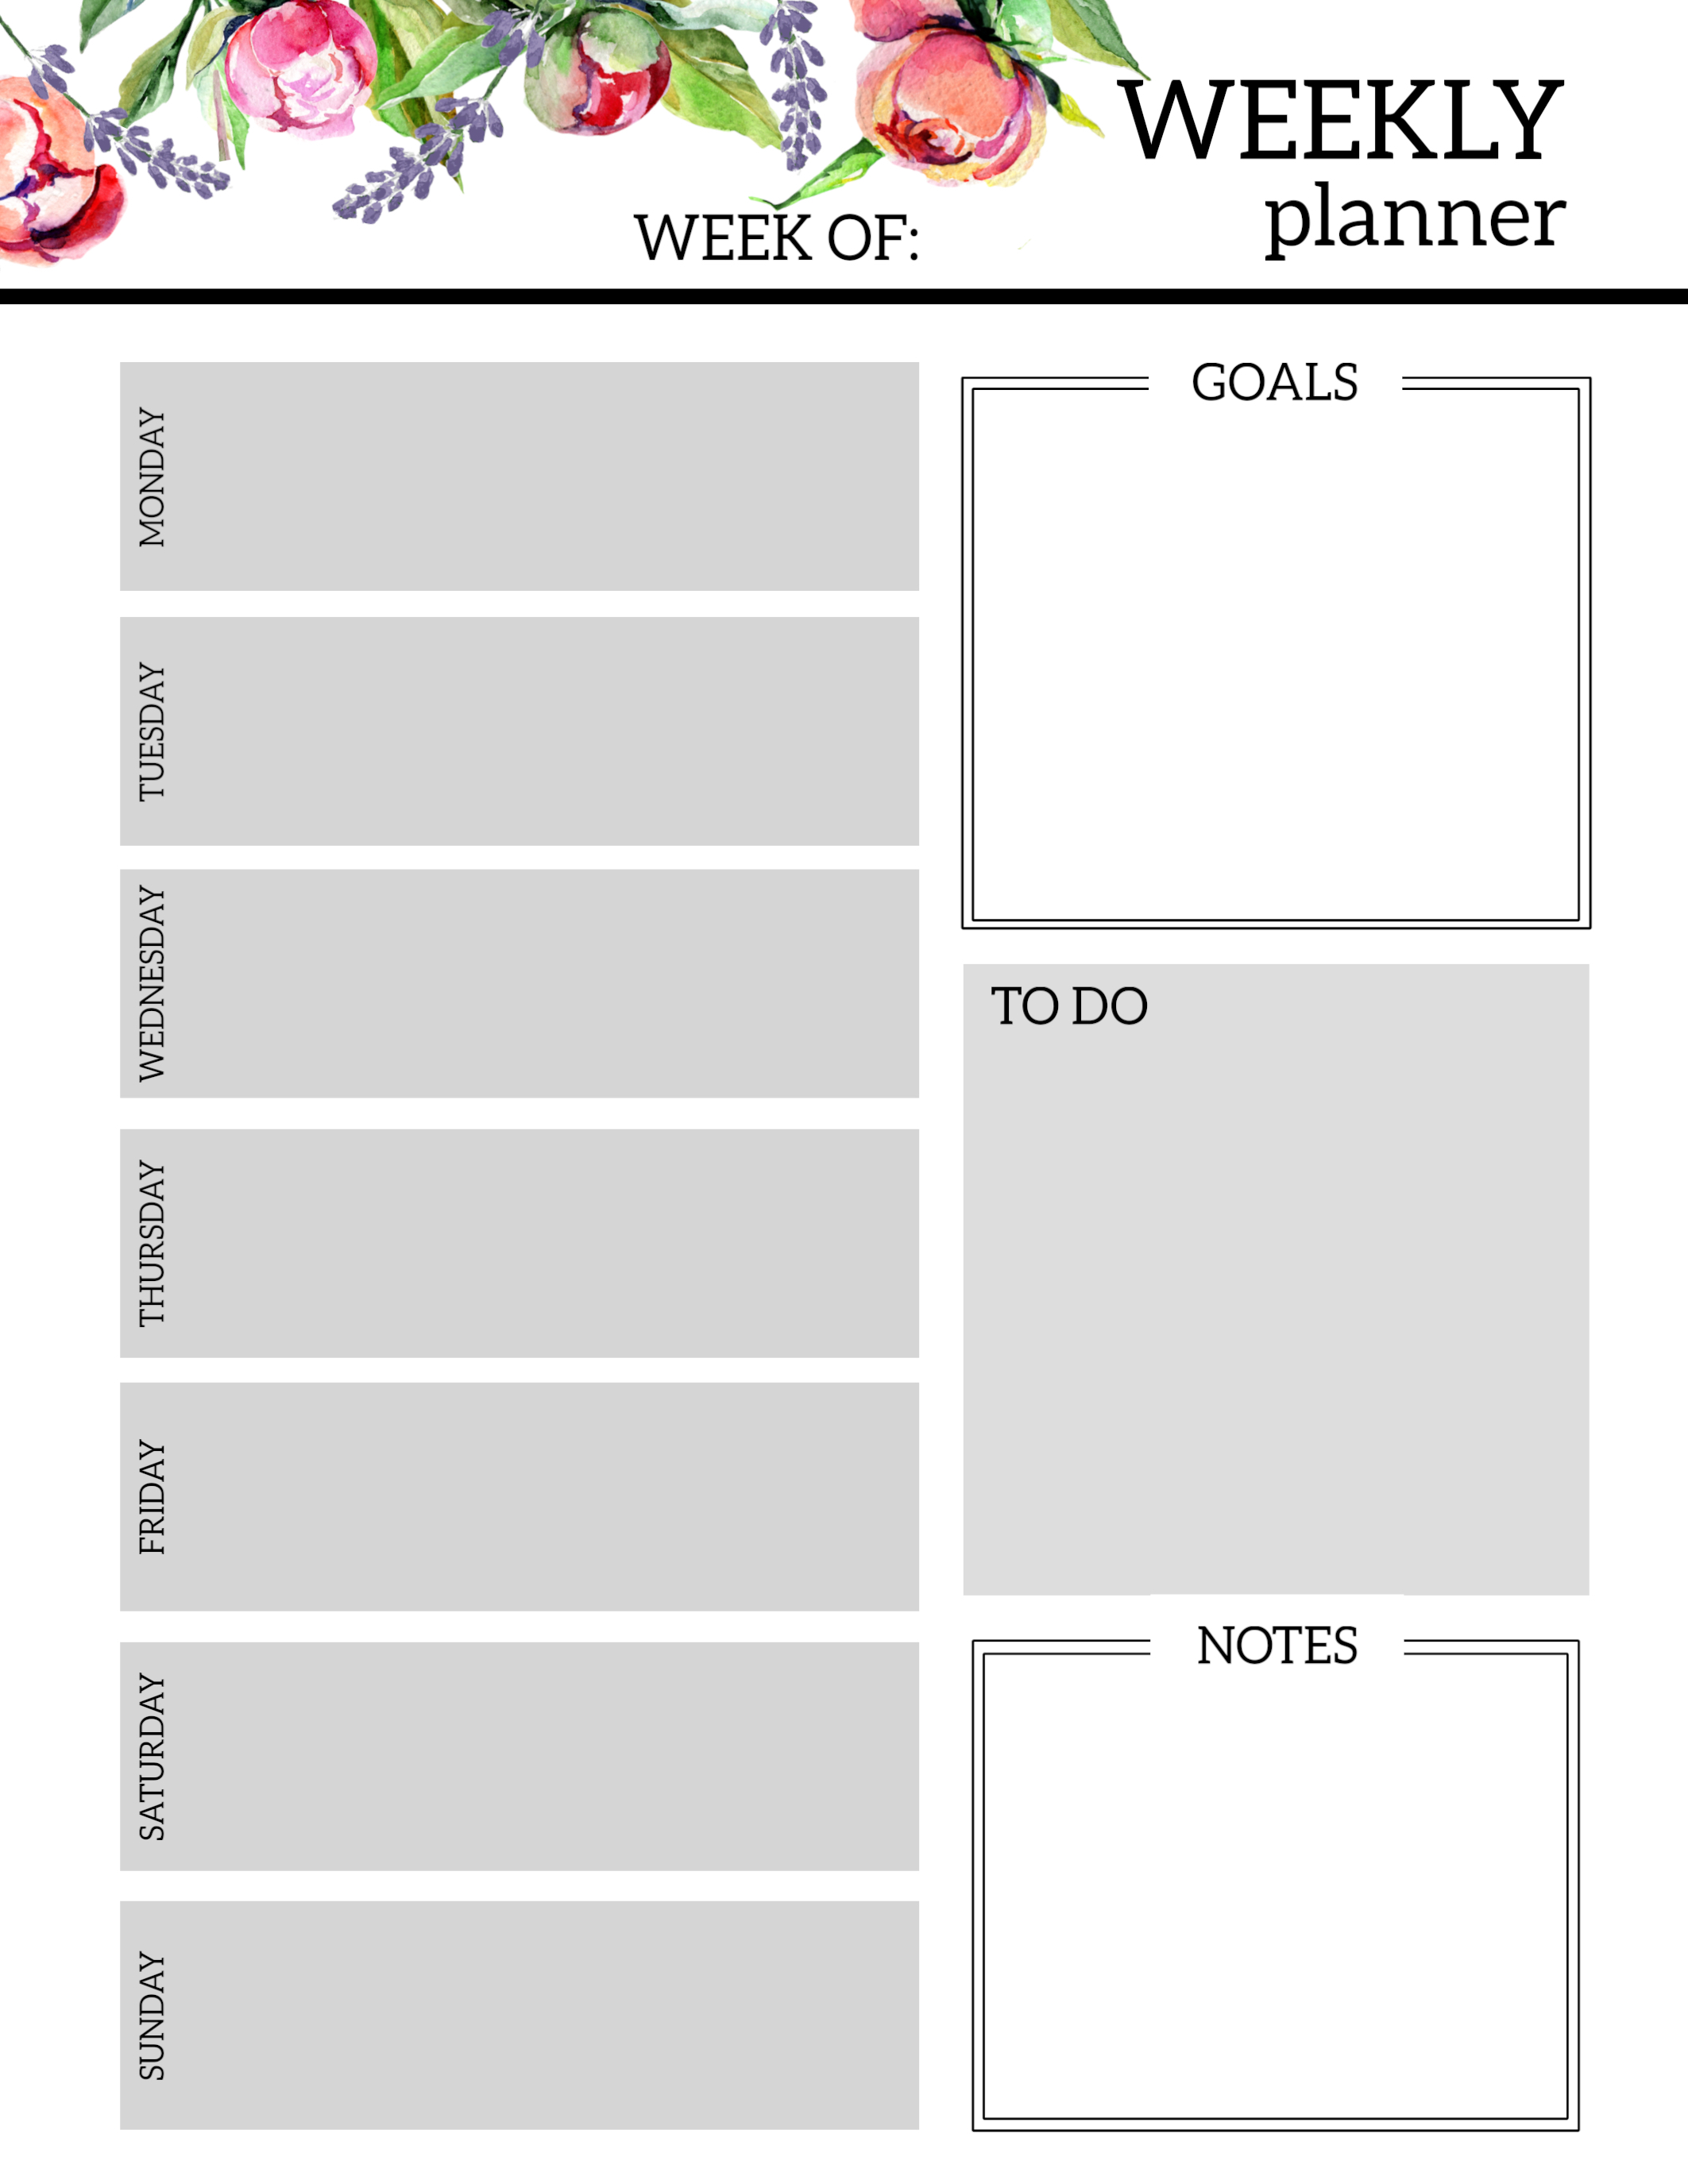 download-your-free-weekly-planners-now-5-designs-to-choose-from